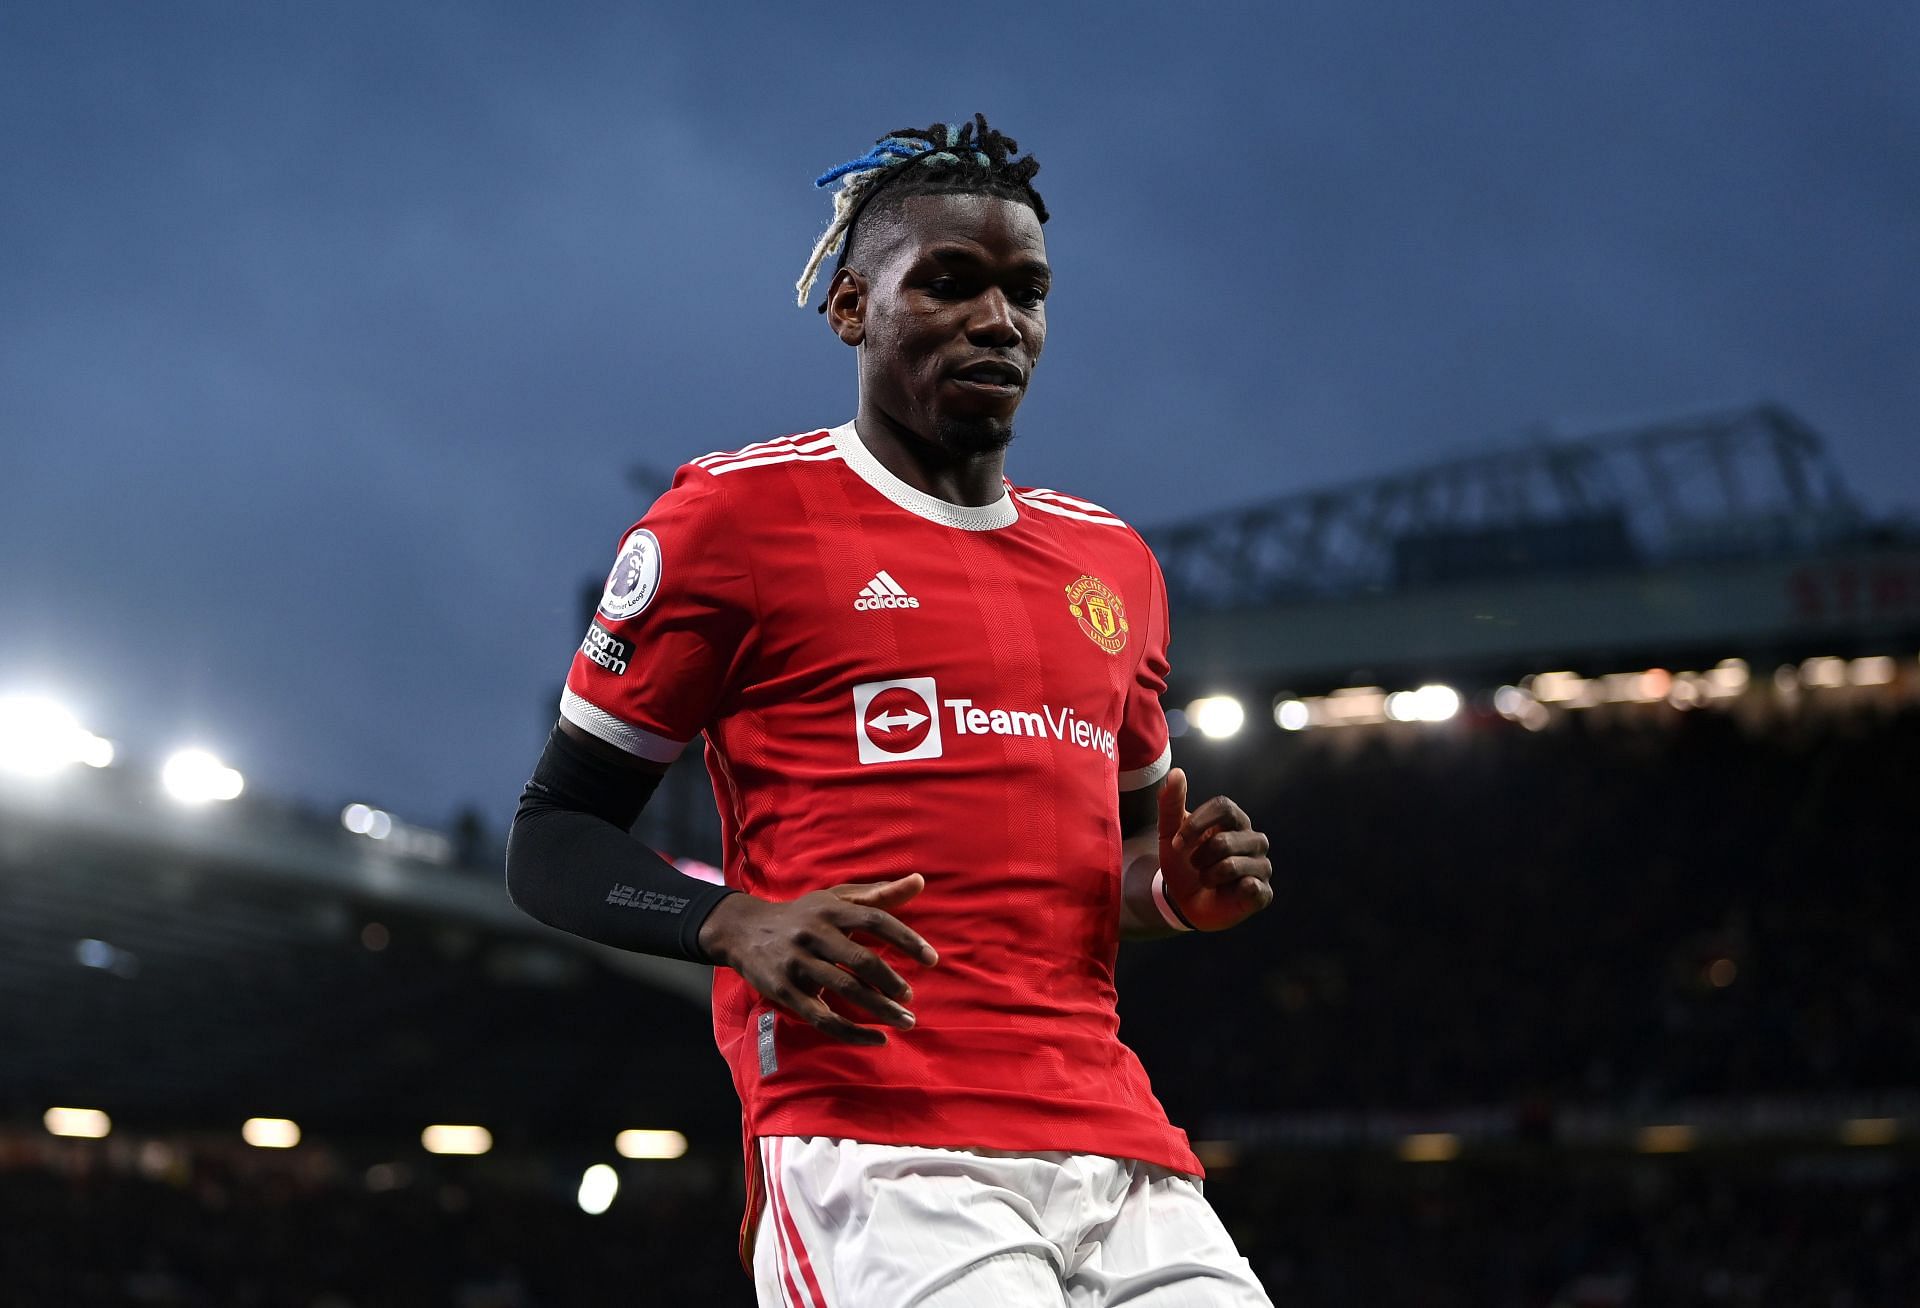 Juventus are ready to offer Manchester United two players in return for Paul Pogba